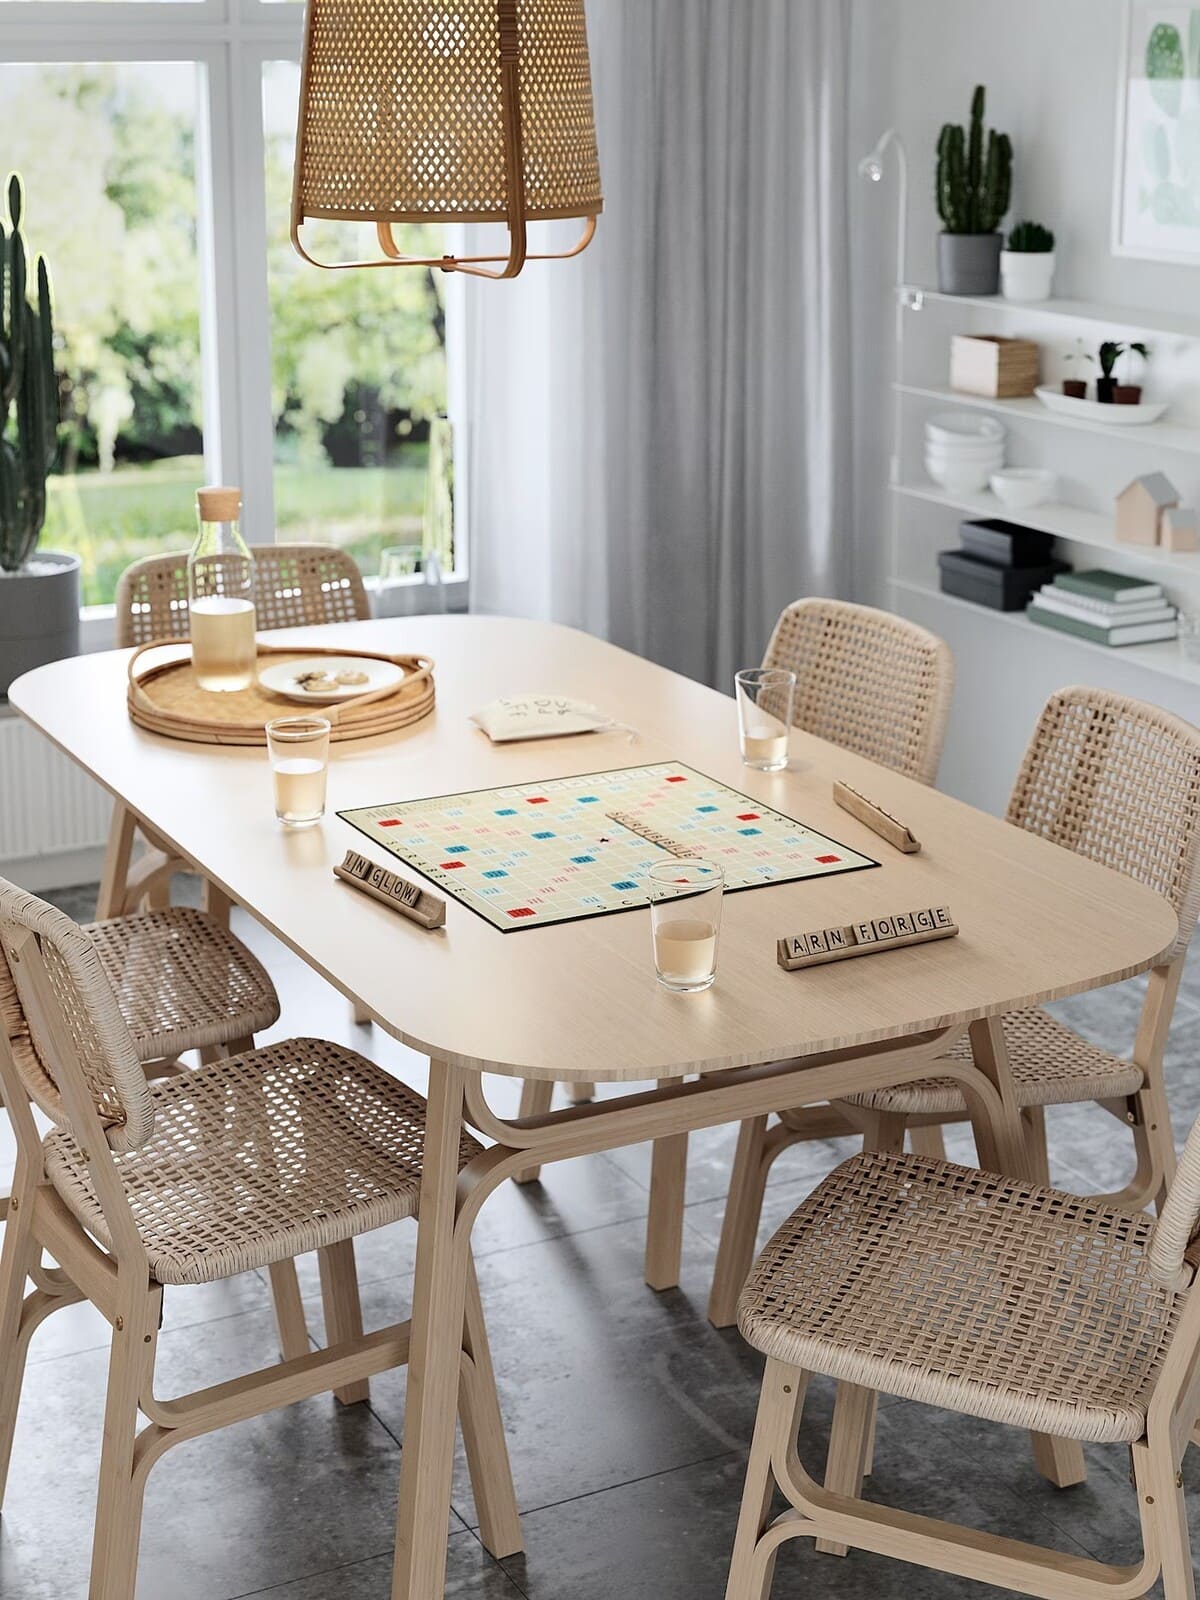 VOXLÖV Dining table from IKEA